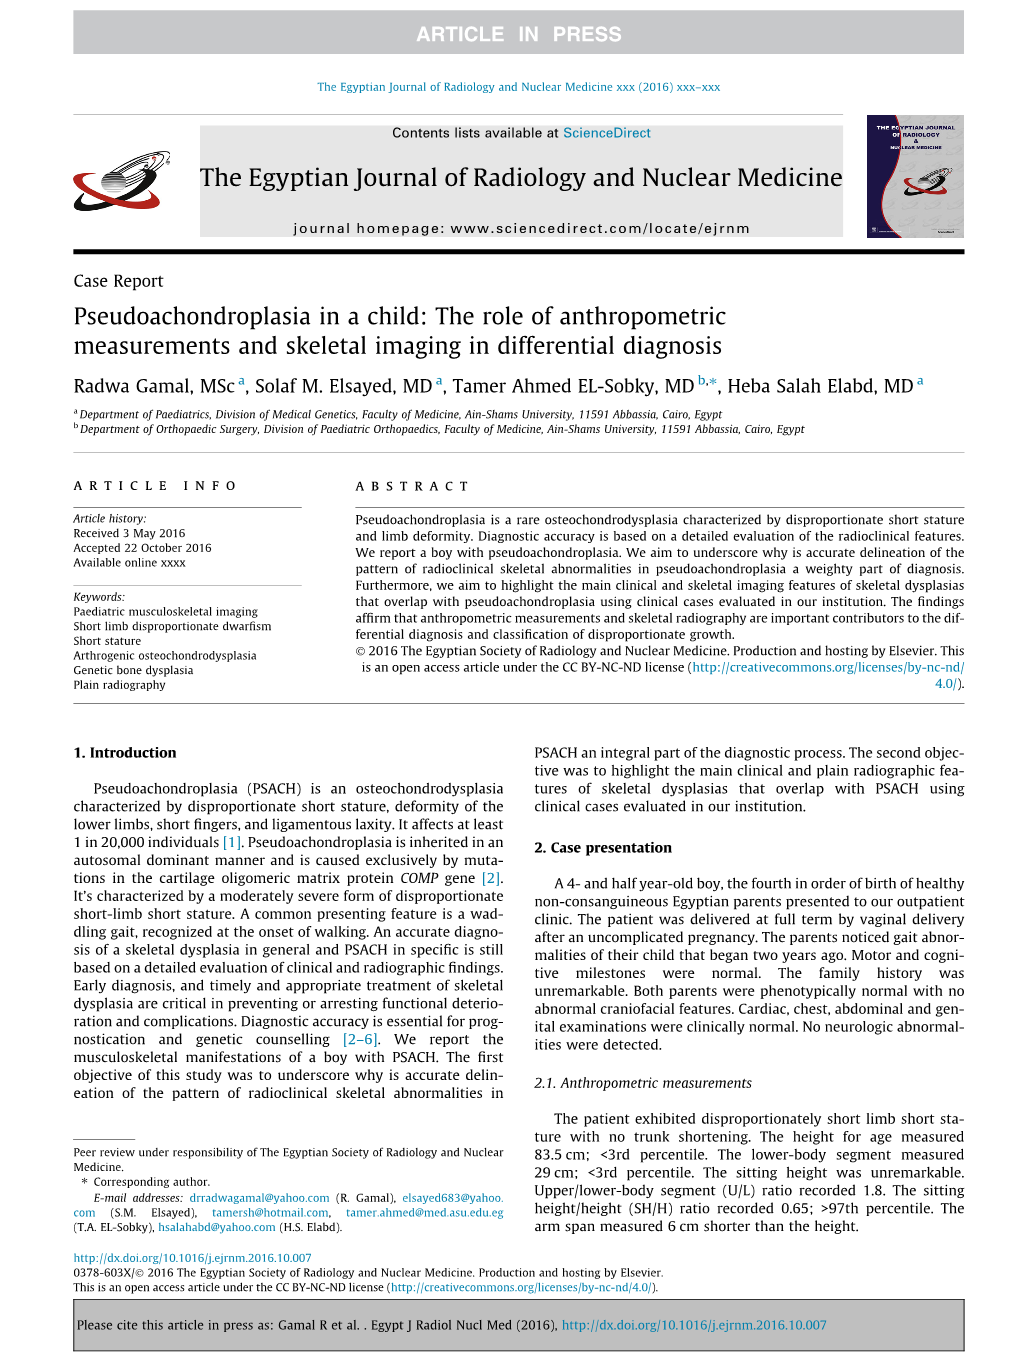 The Role of Anthropometric Measurements and Skeletal Imaging in Differential Diagnosis ⇑ Radwa Gamal, Msc A, Solaf M